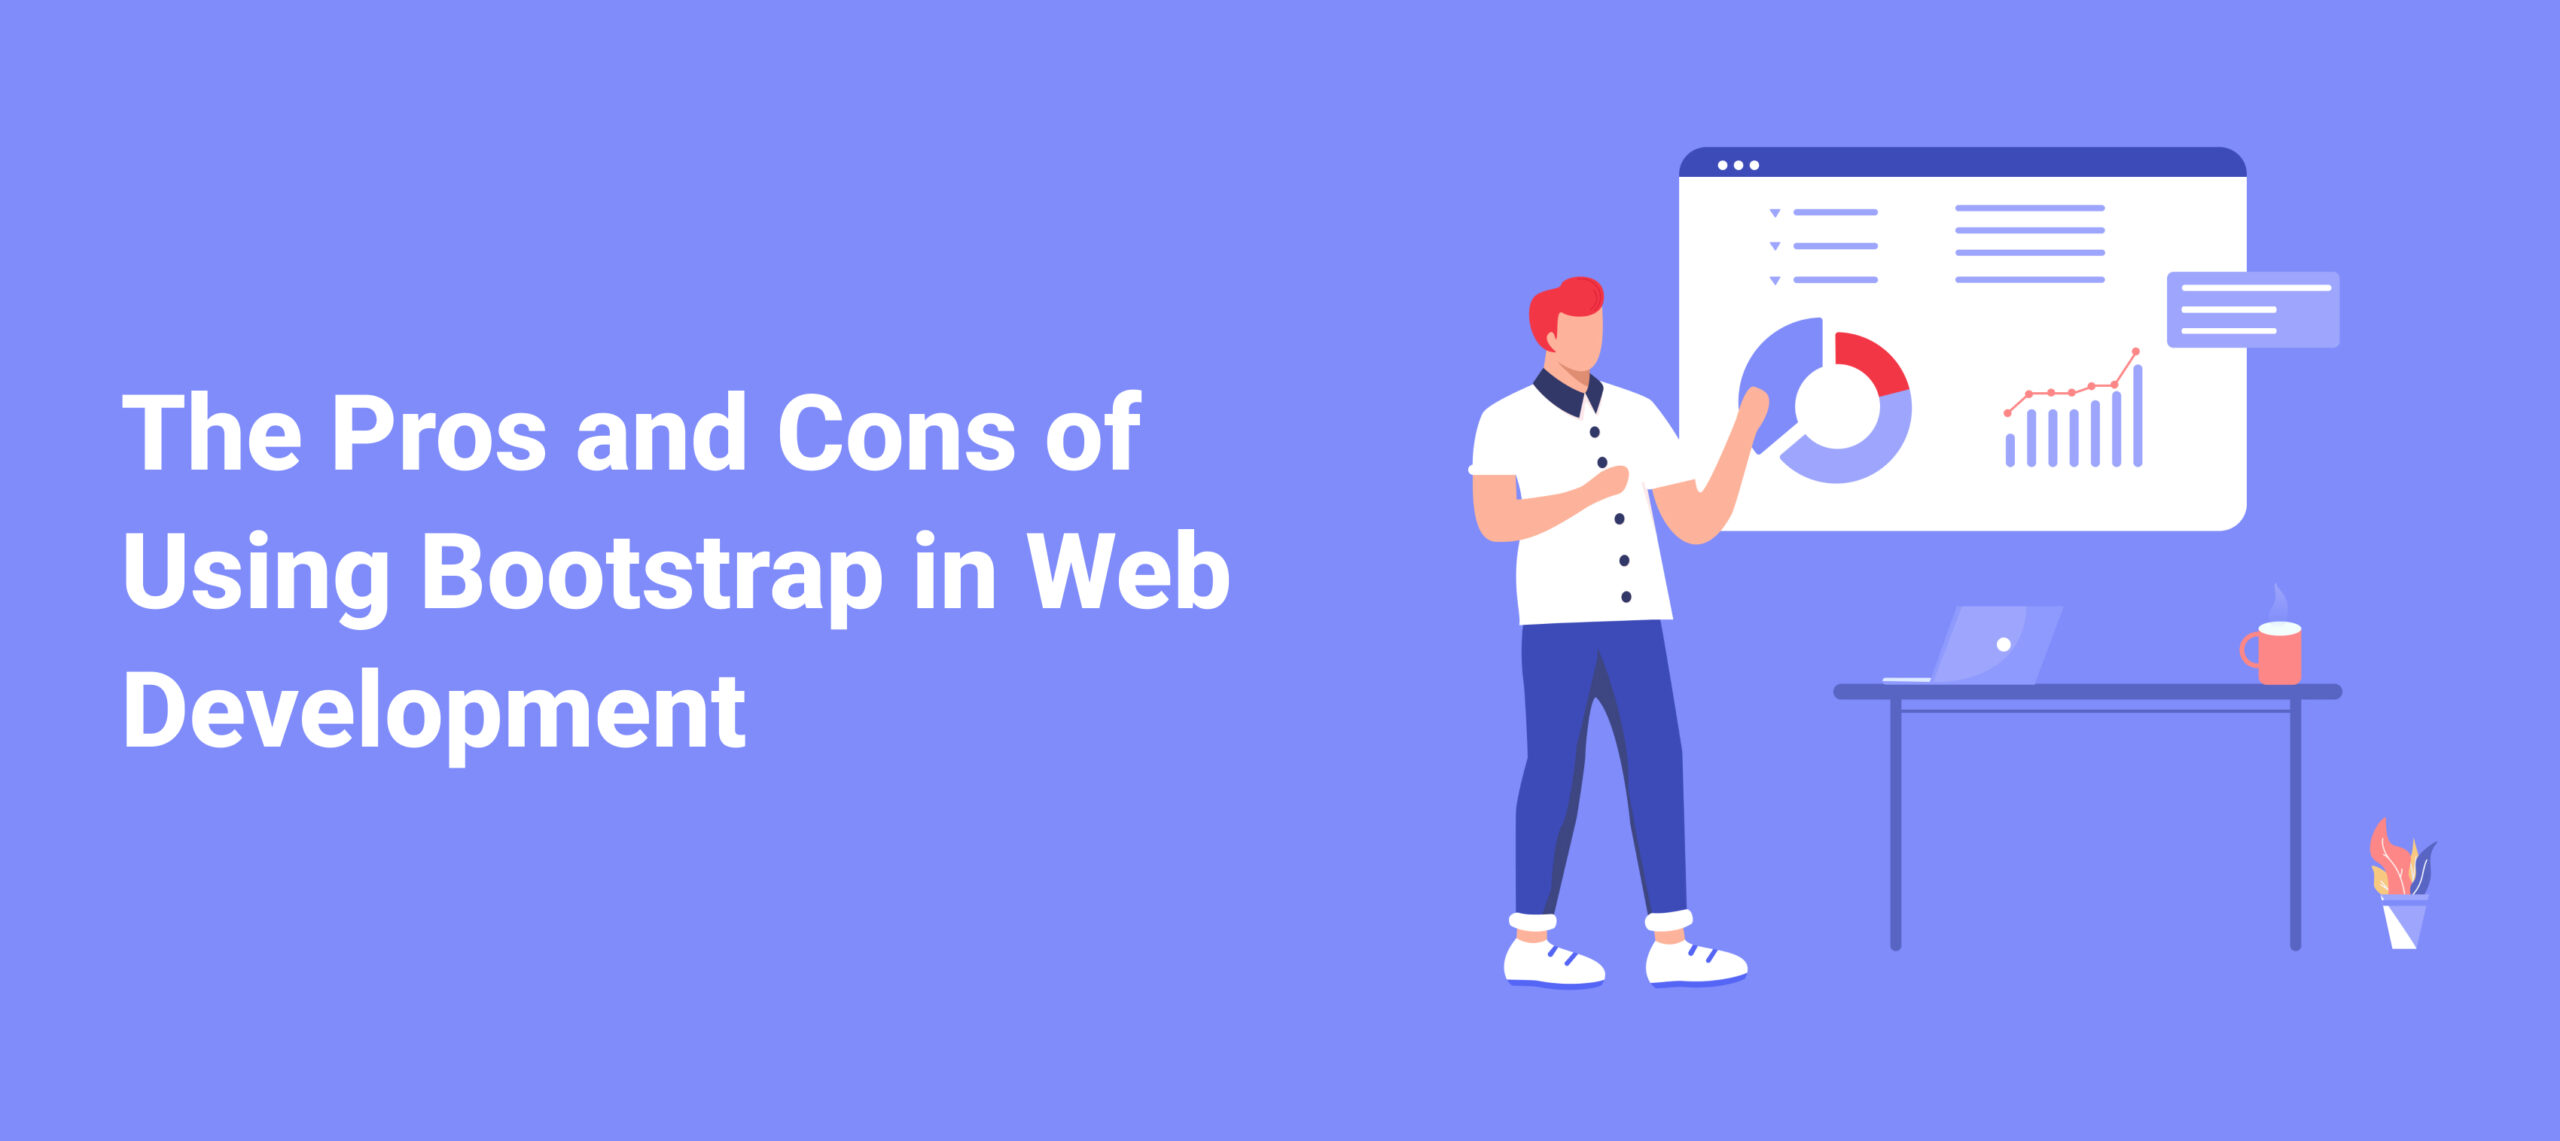  The Pros and Cons of Using Bootstrap in Web Development